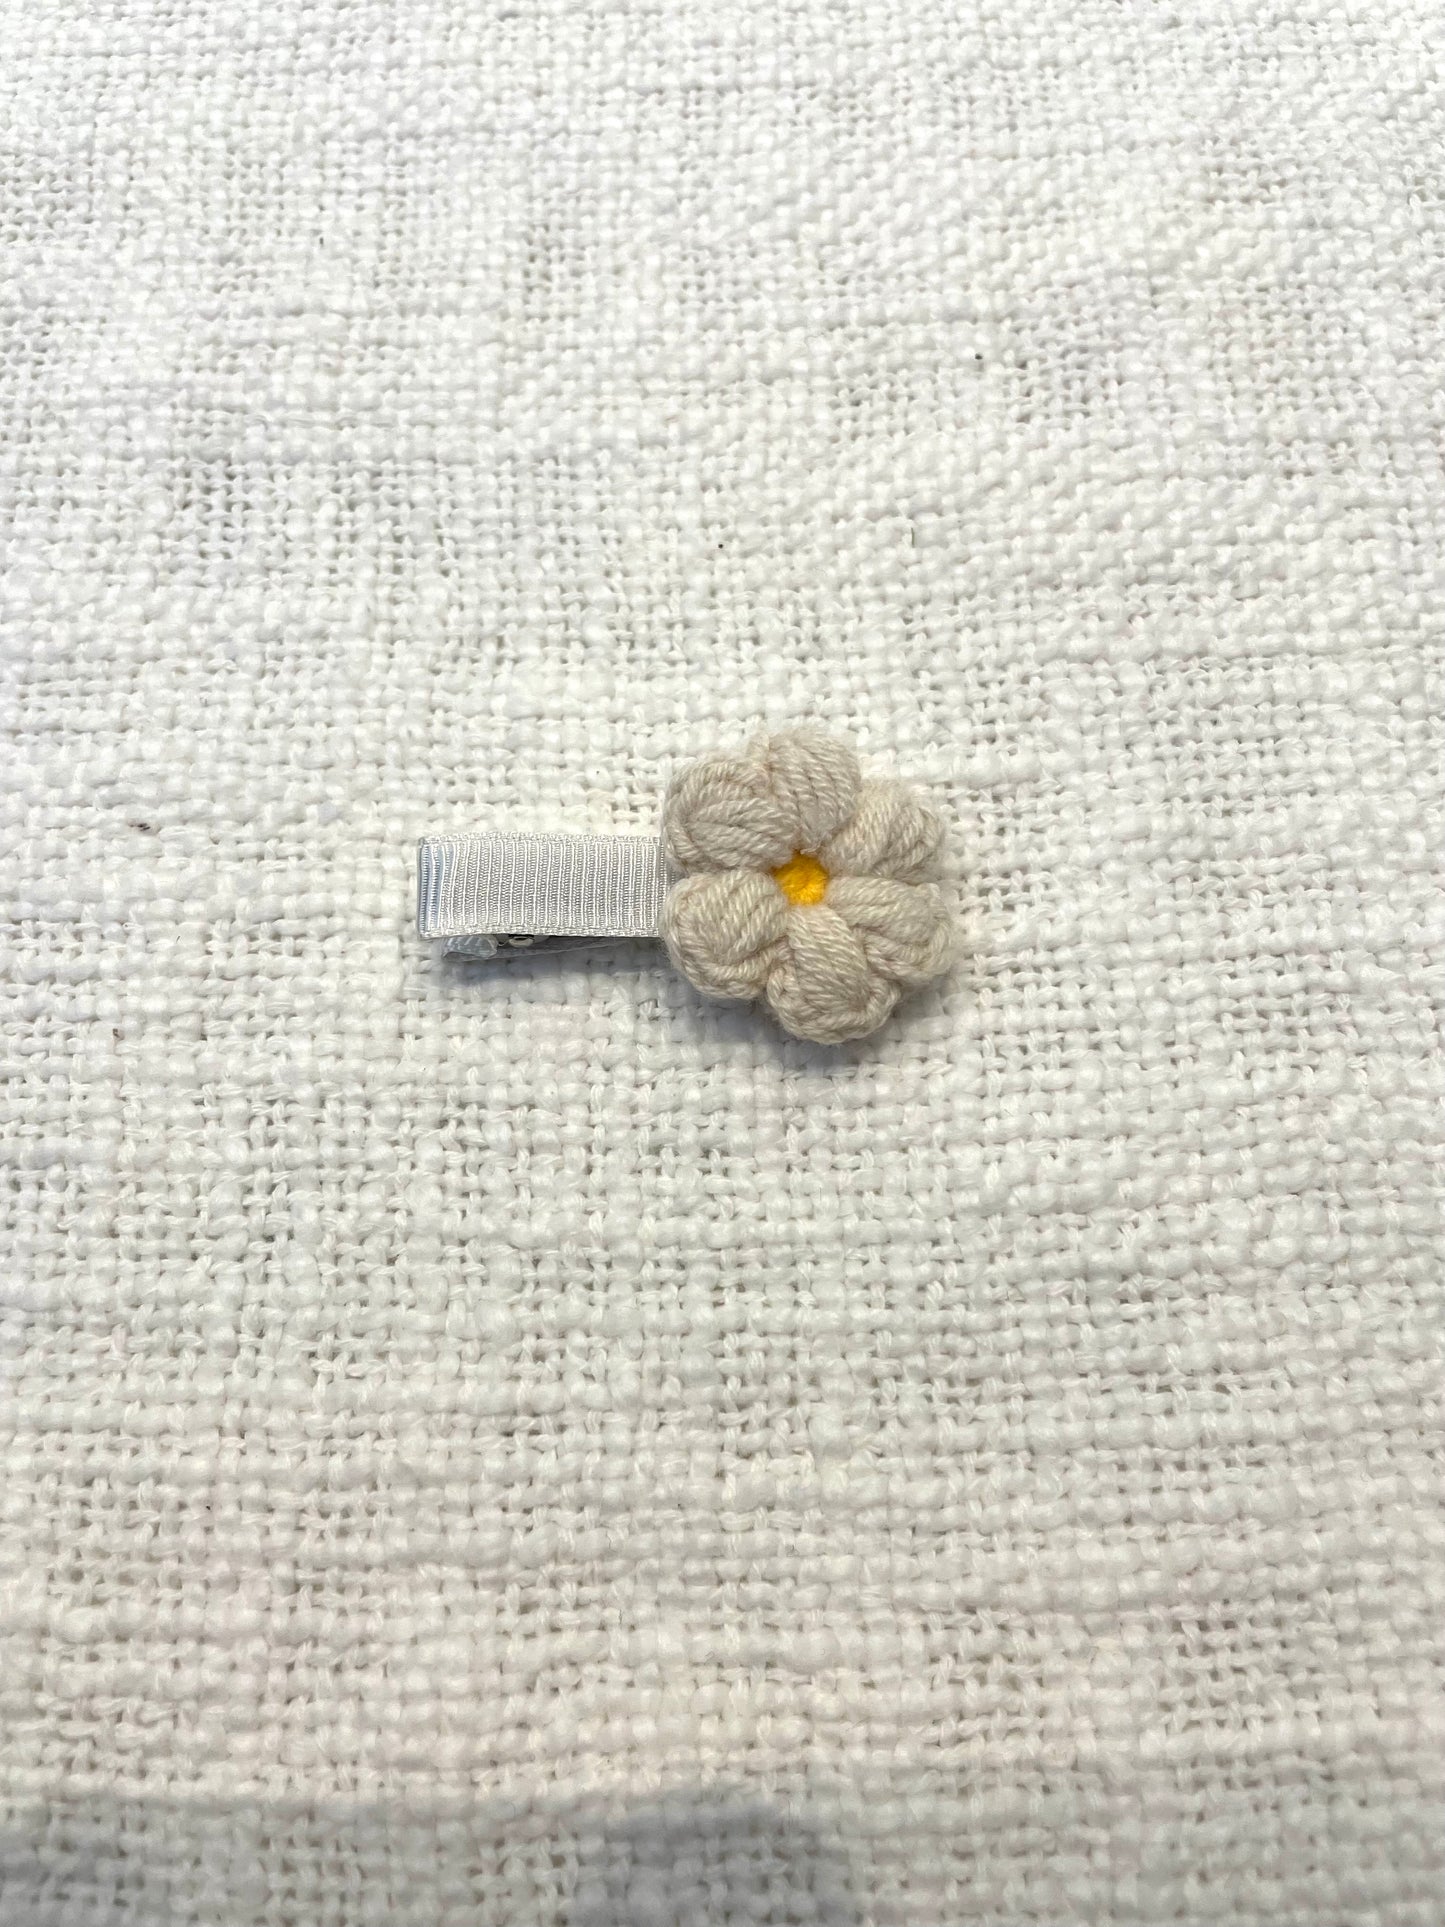 Small flower clip